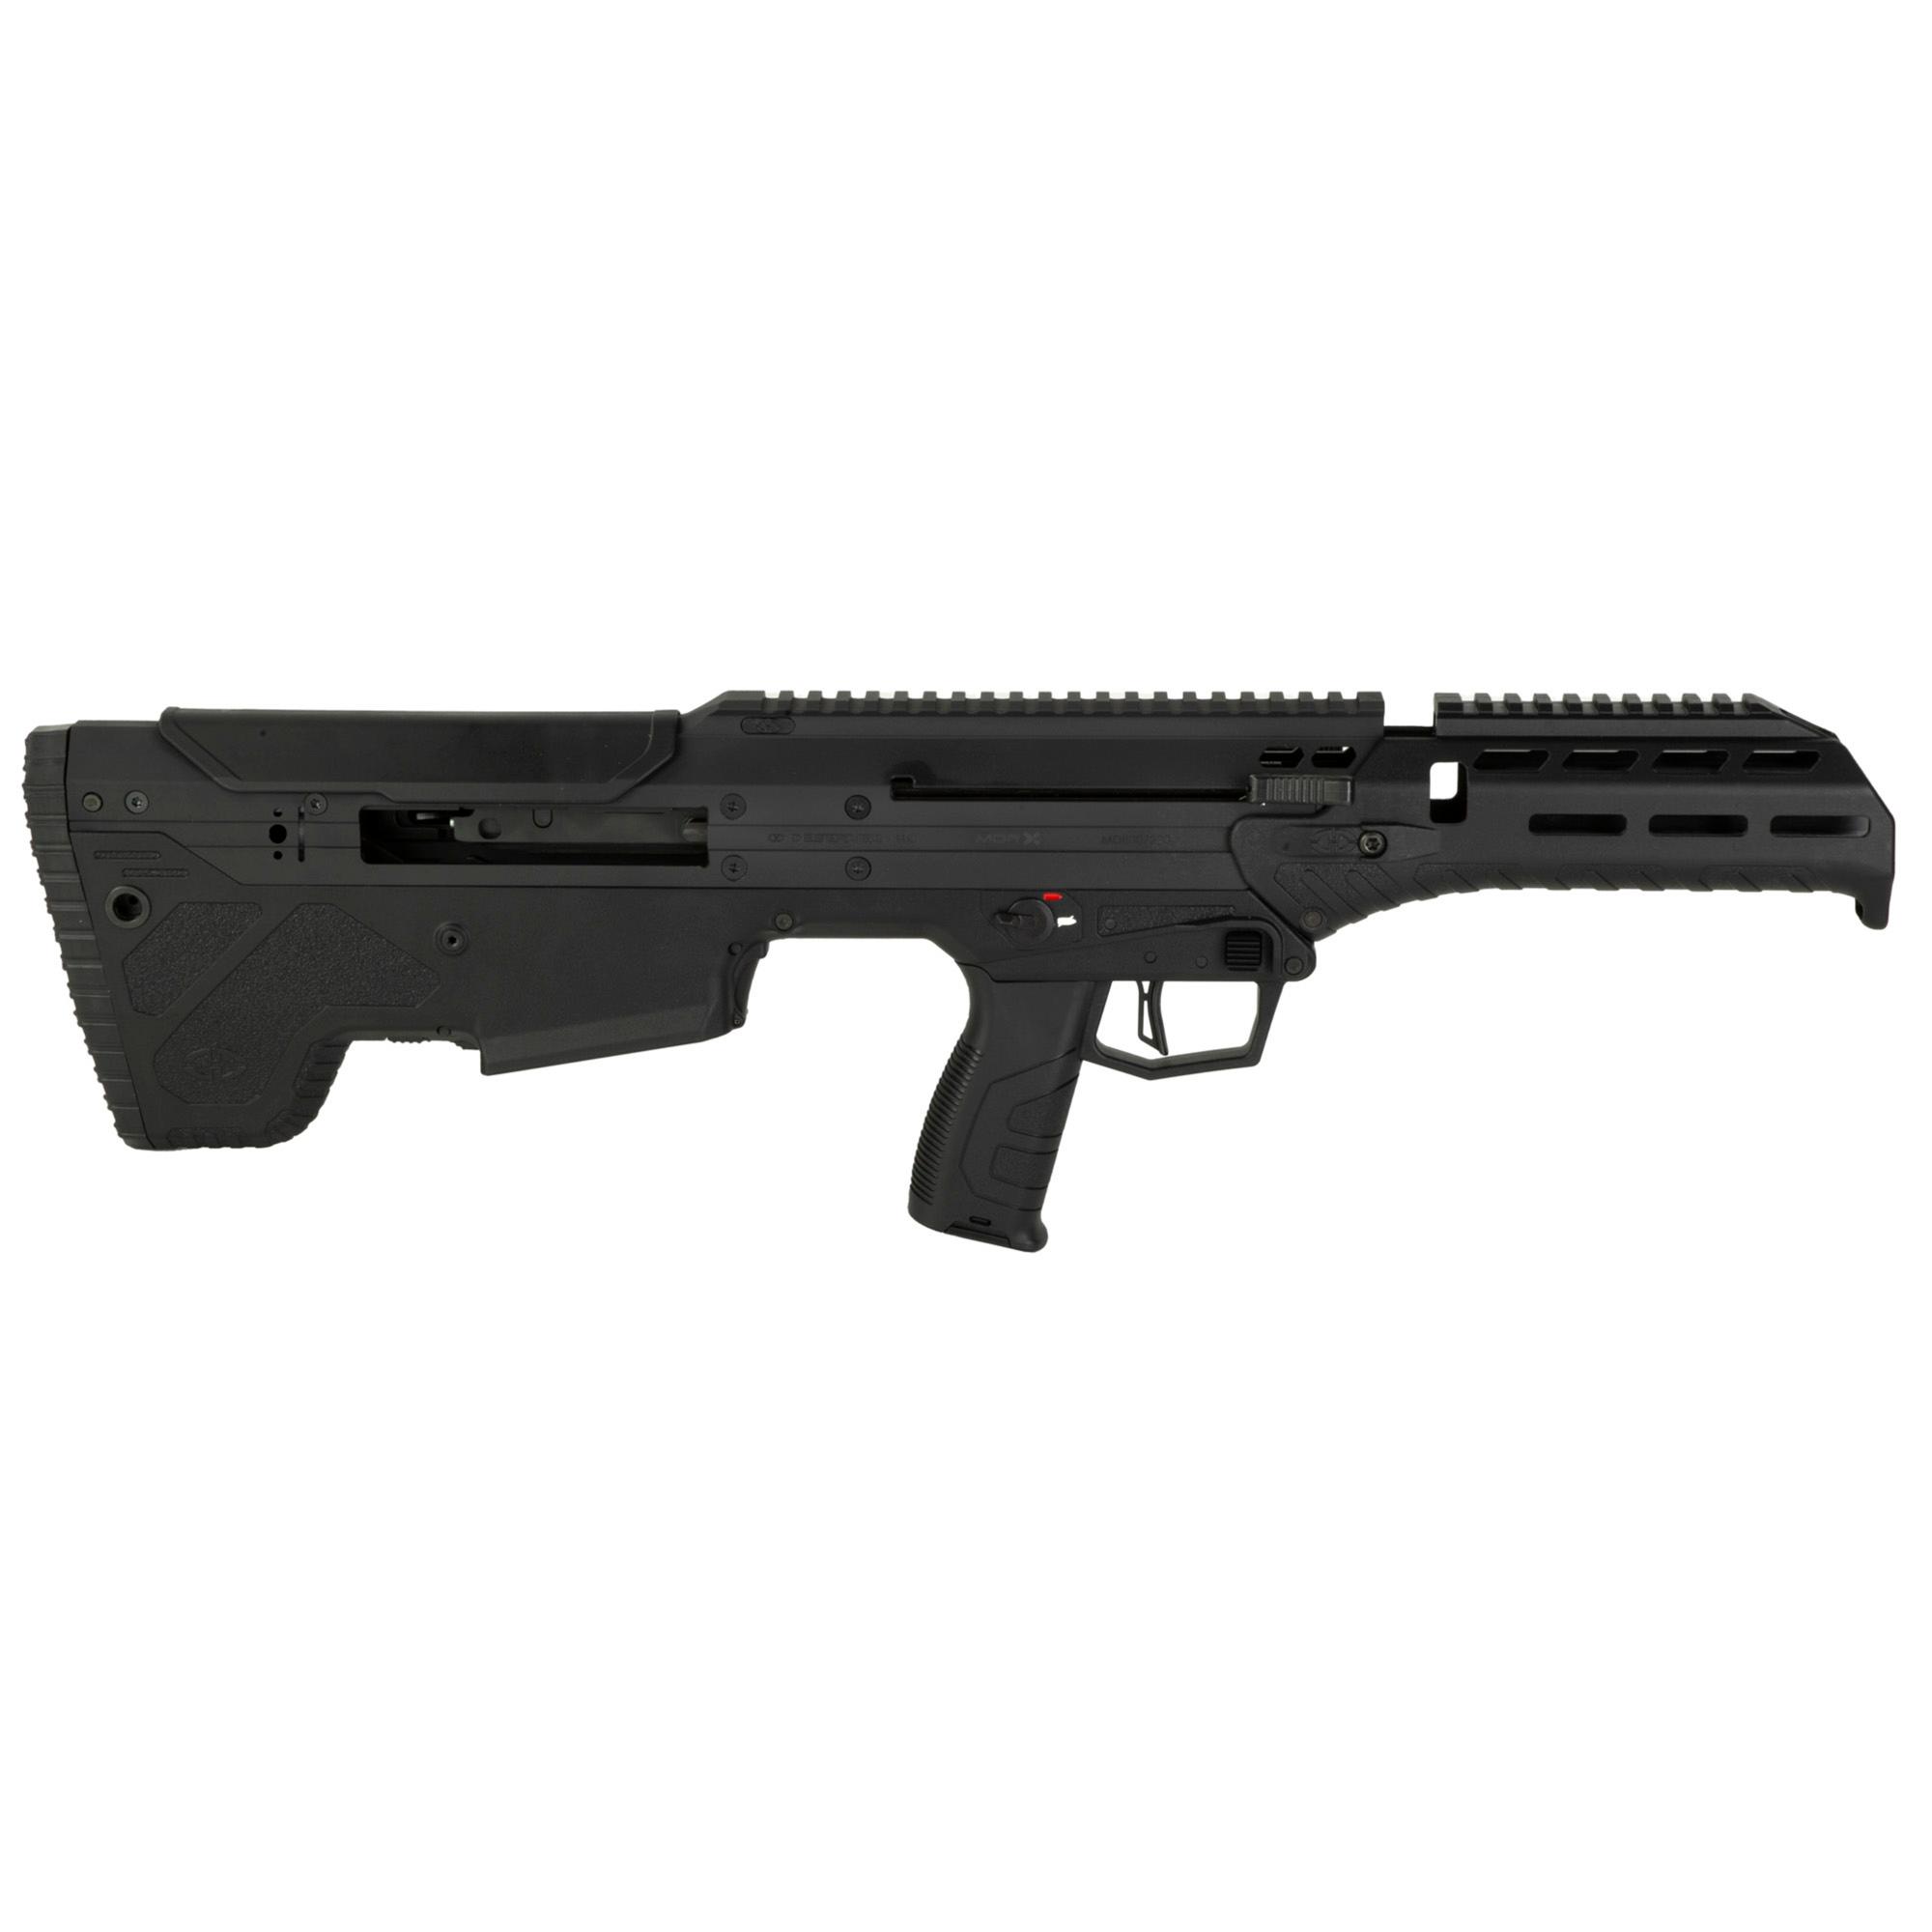 Long Guns DT MDRX CHASSIS SIDE BLK image 2